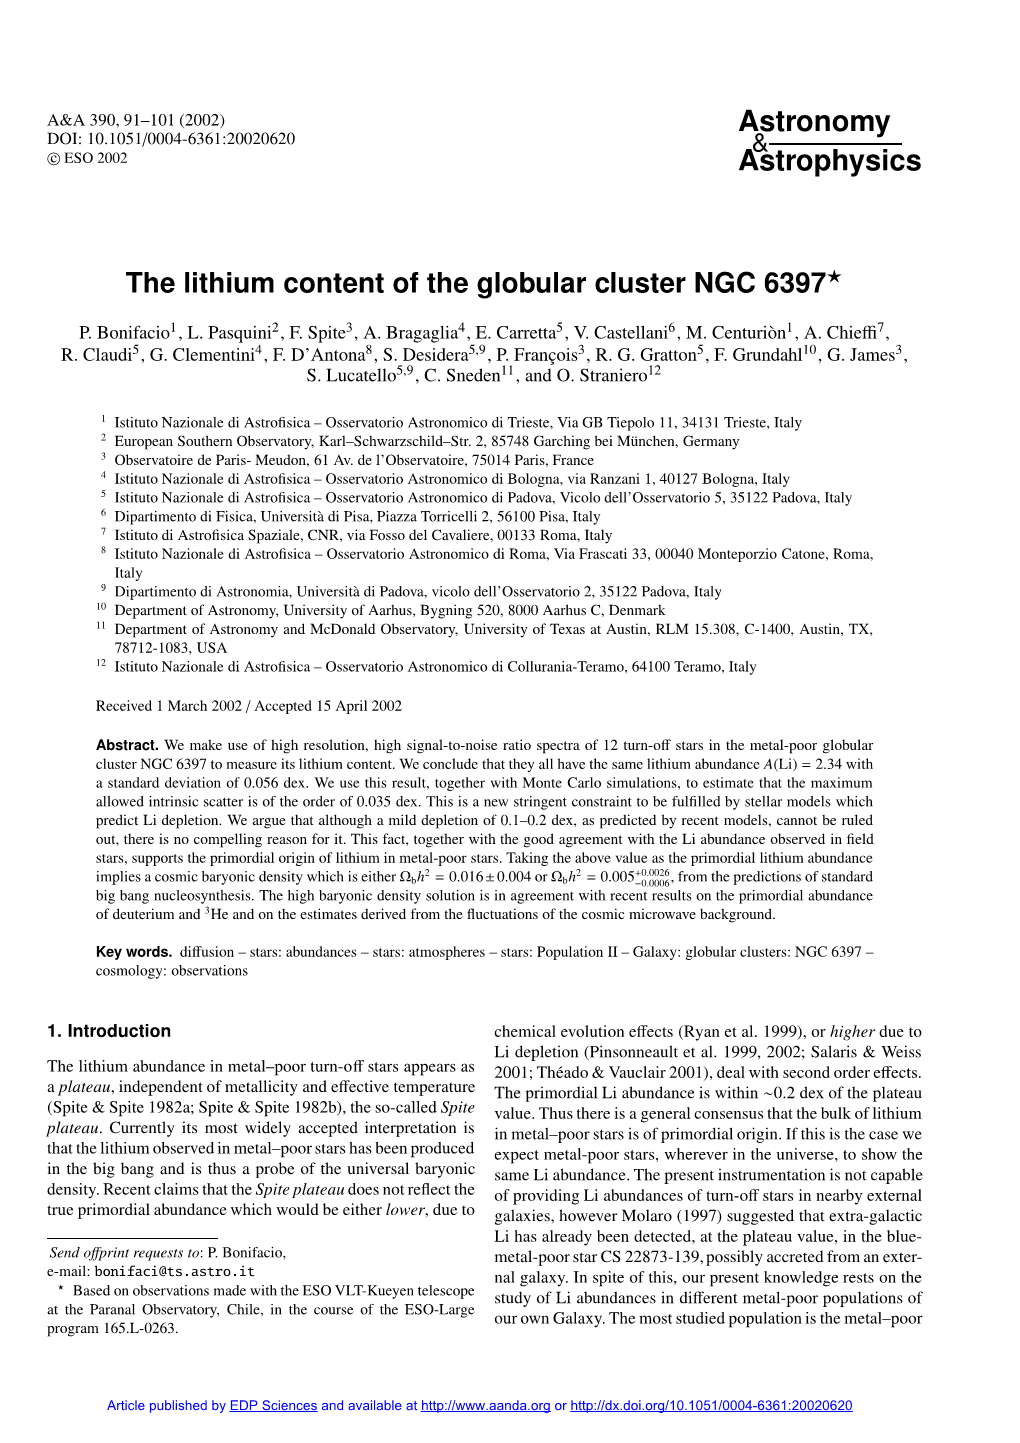 The Lithium Content of the Globular Cluster NGC 6397?